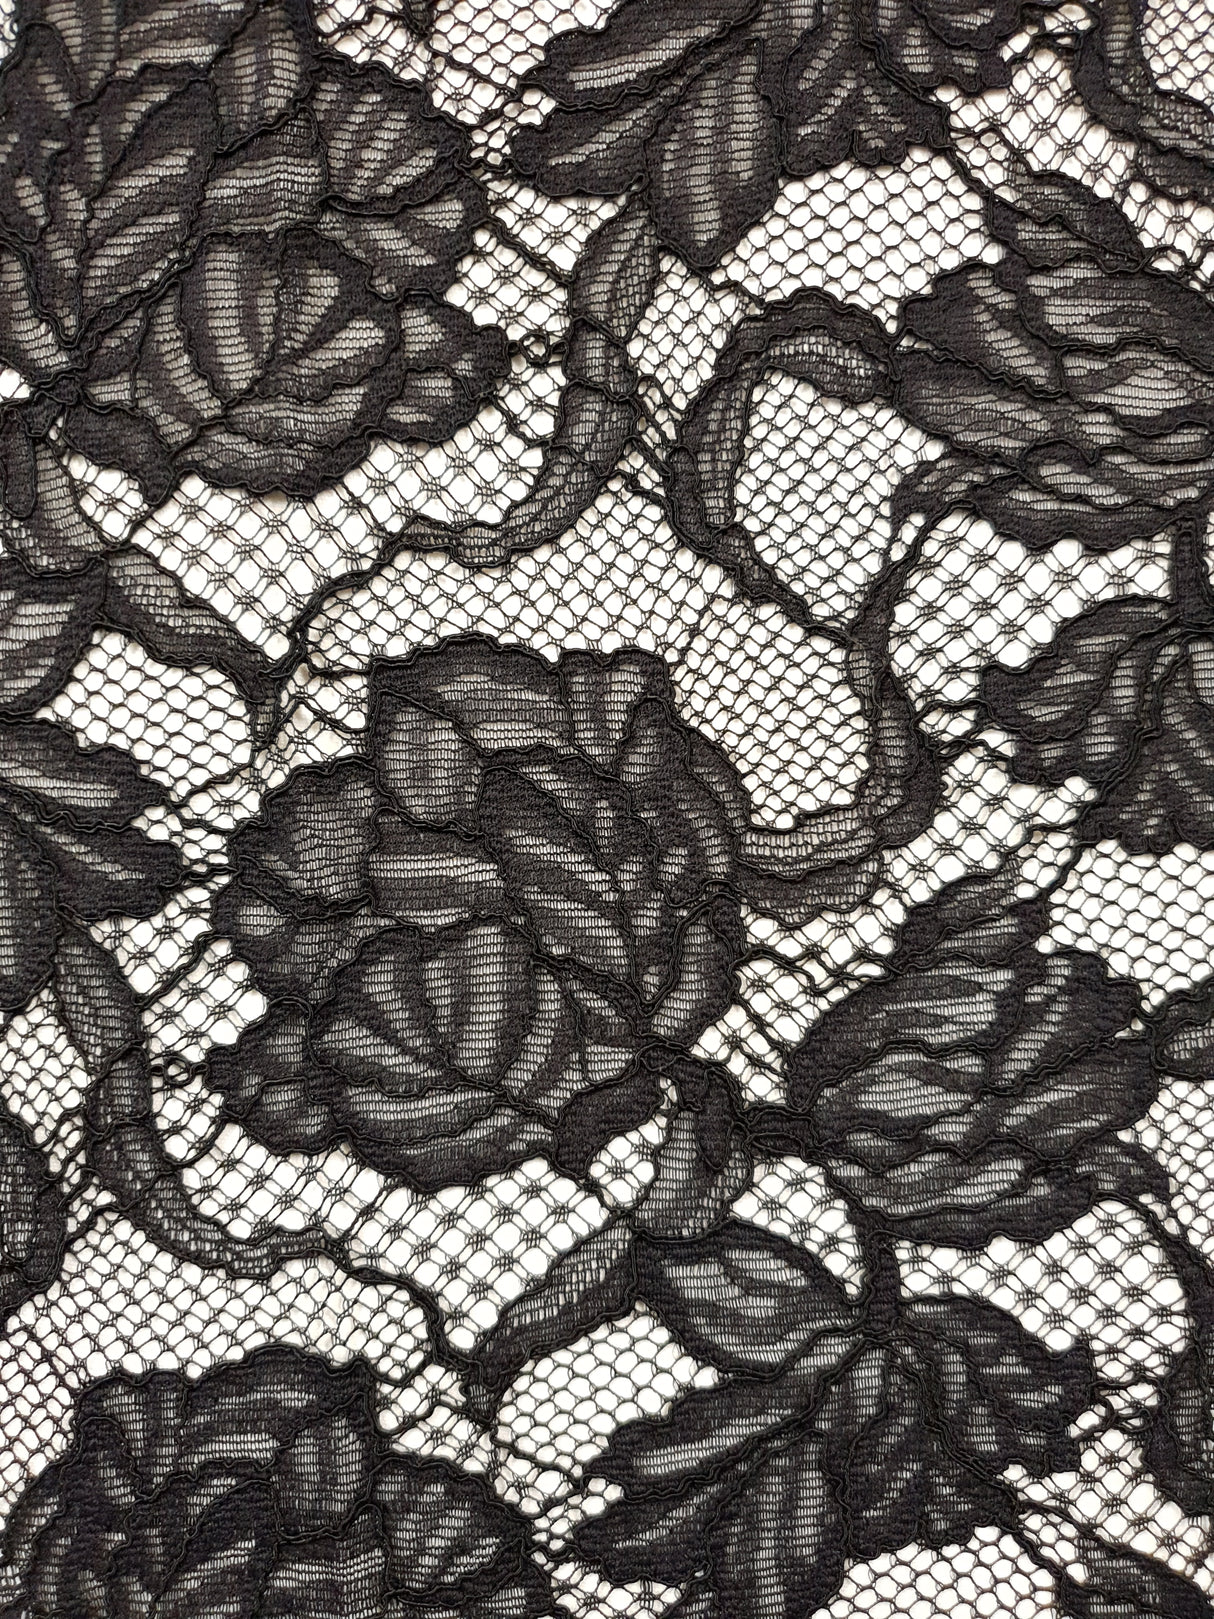 Lace Fabric - LV